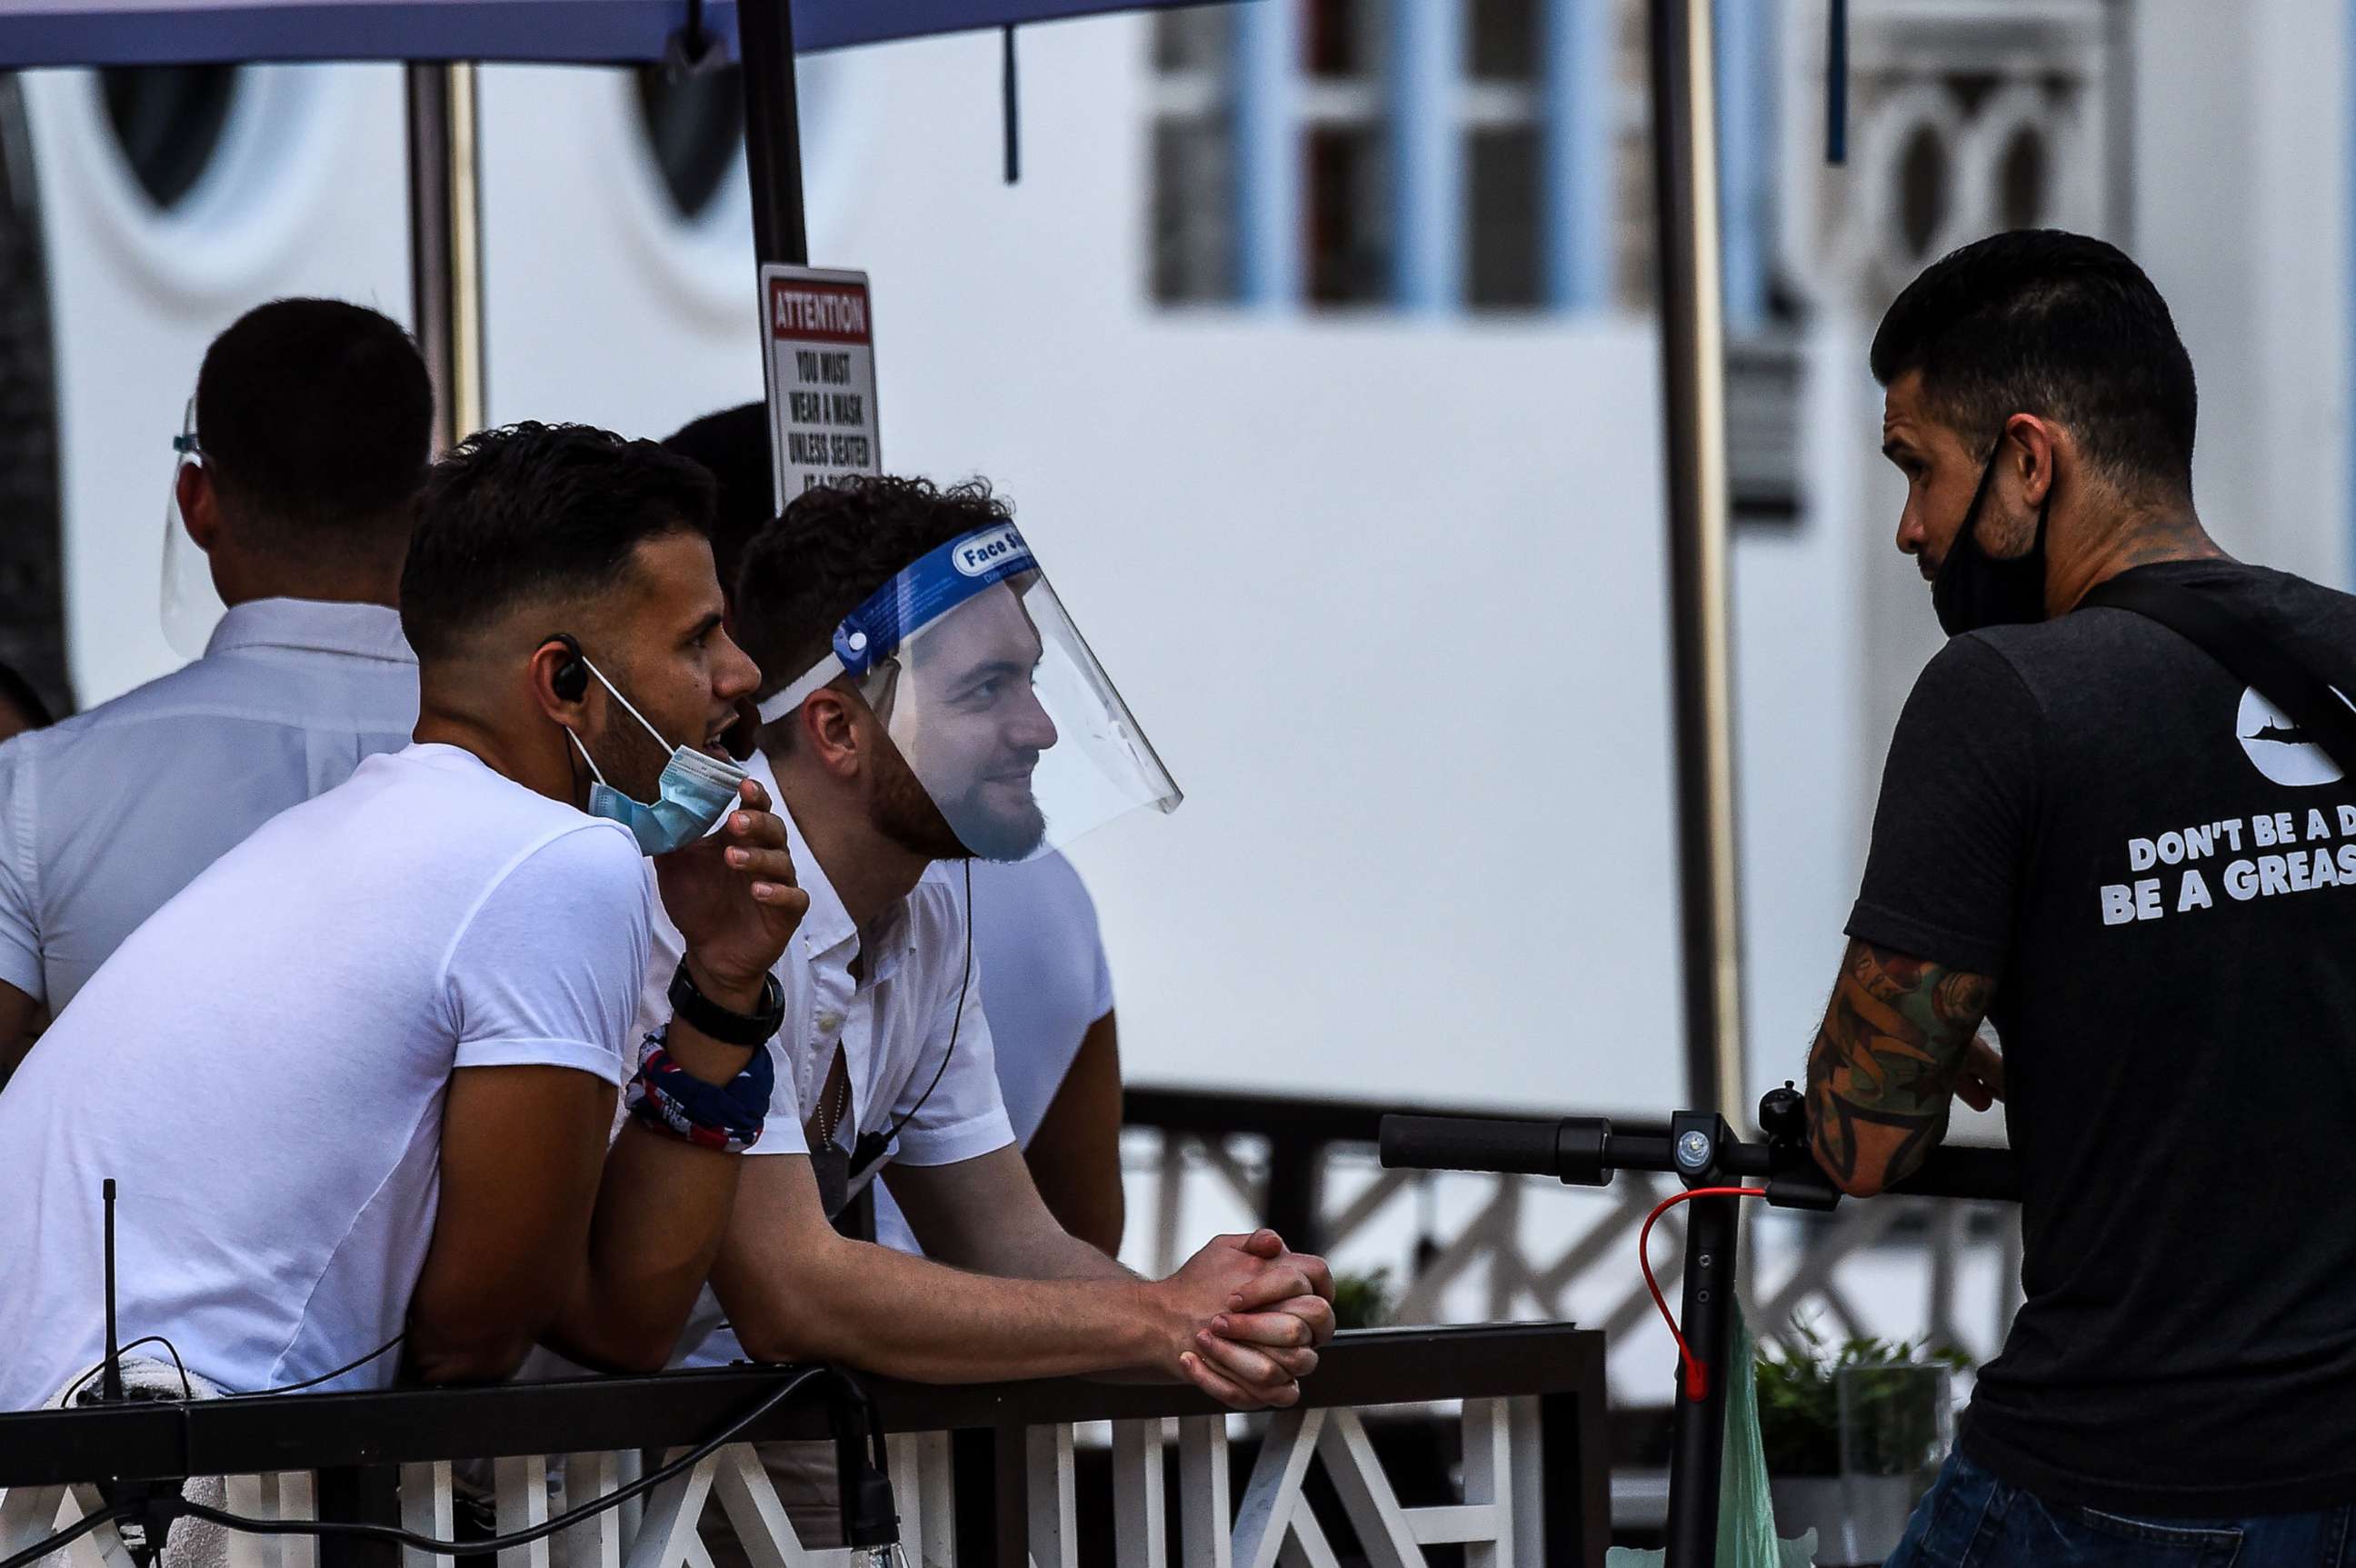 PHOTO: A waiter covers his face with a shield as he chat with another man at a restaurant on Ocean Drive in Miami Beach, Fla., on July 14, 2020, amid the coronavirus pandemic.